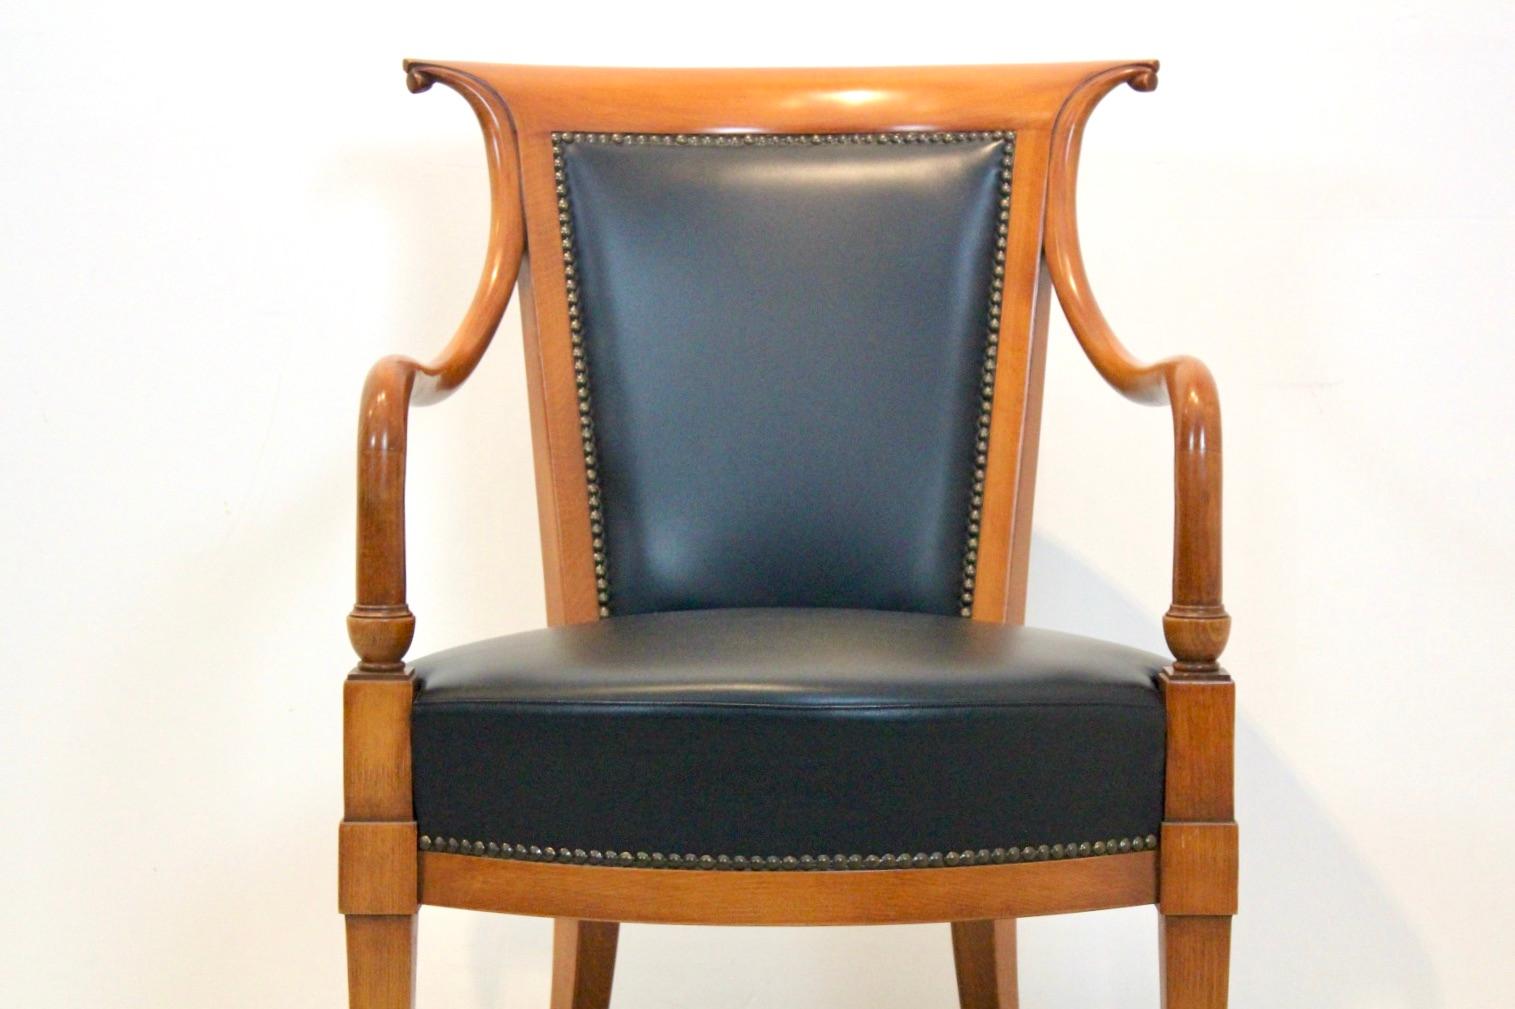 Exclusive and stylish black leather chair in ‘Directoire’ style handmade by the Italian company Selva in the 1990s (marked). The frame is in solid beech and very nicely made.
The leather has some normal wear but overall in very nice condition. Good